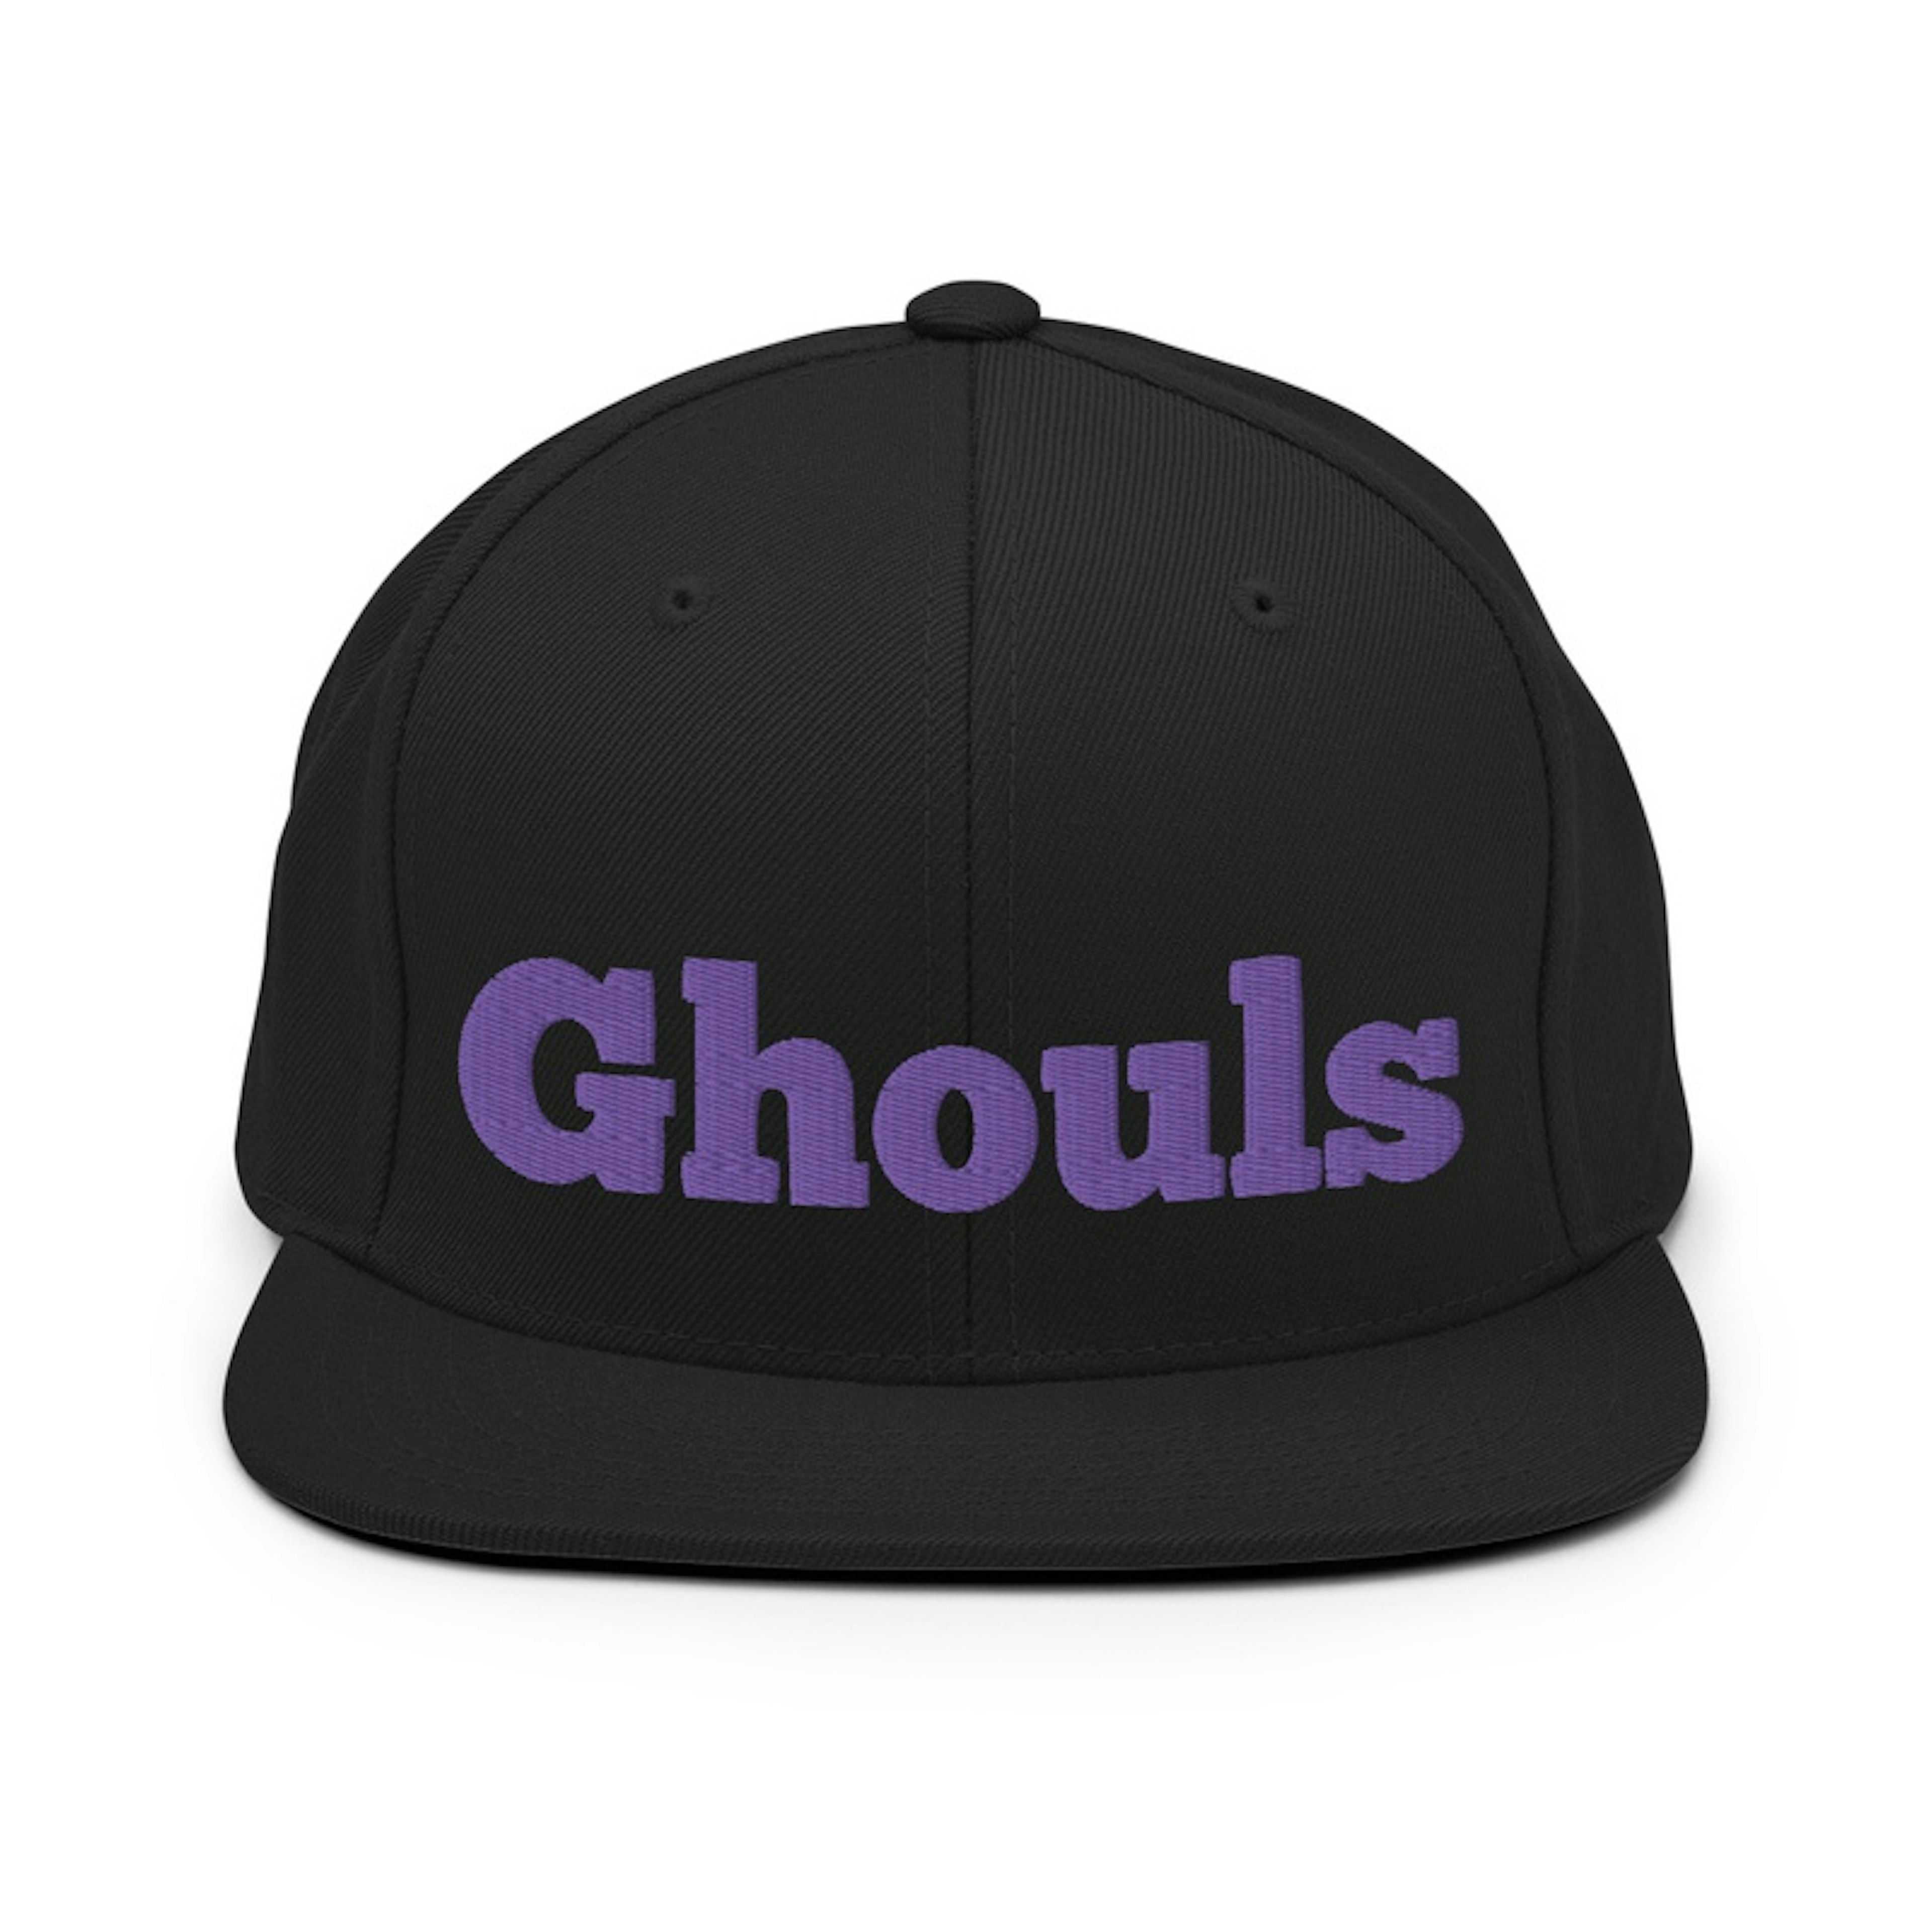 Ghouls hat